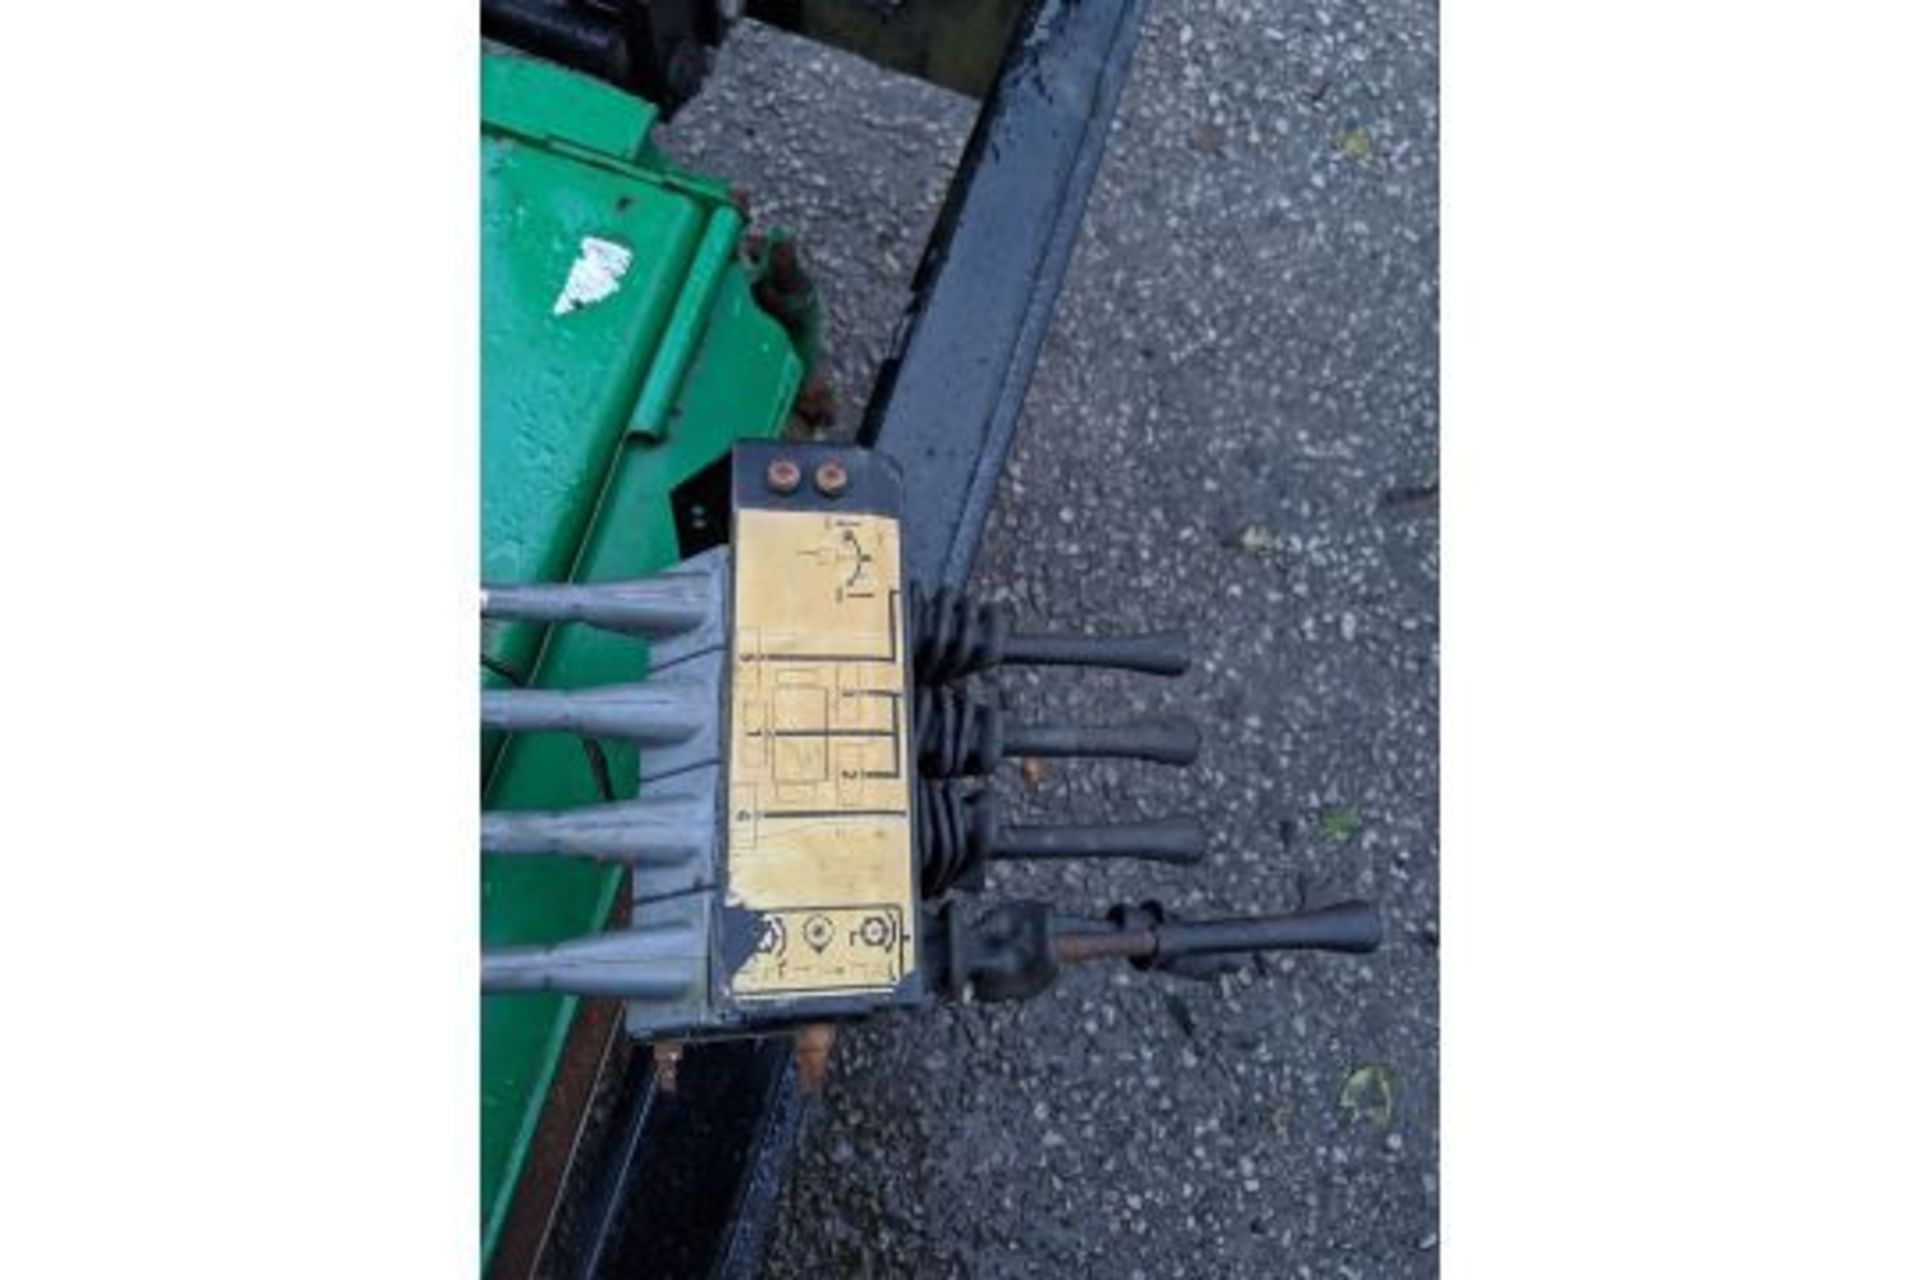 Ransomes TG3400 Tow Behind Gang Mower - Image 4 of 5